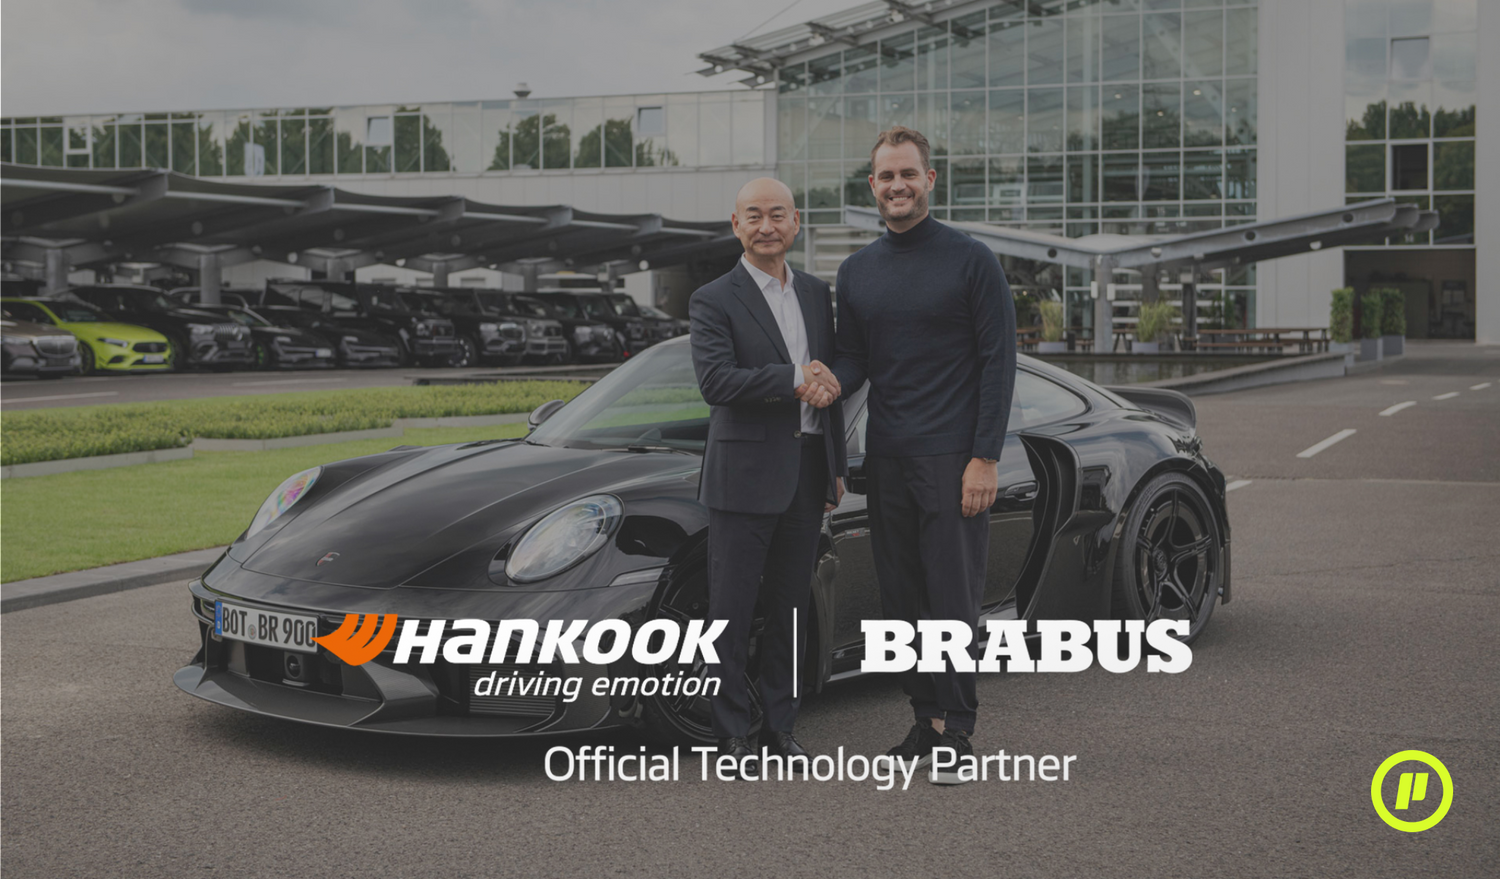 The premium tire manufacturer Hankook is official Brabus technology partner